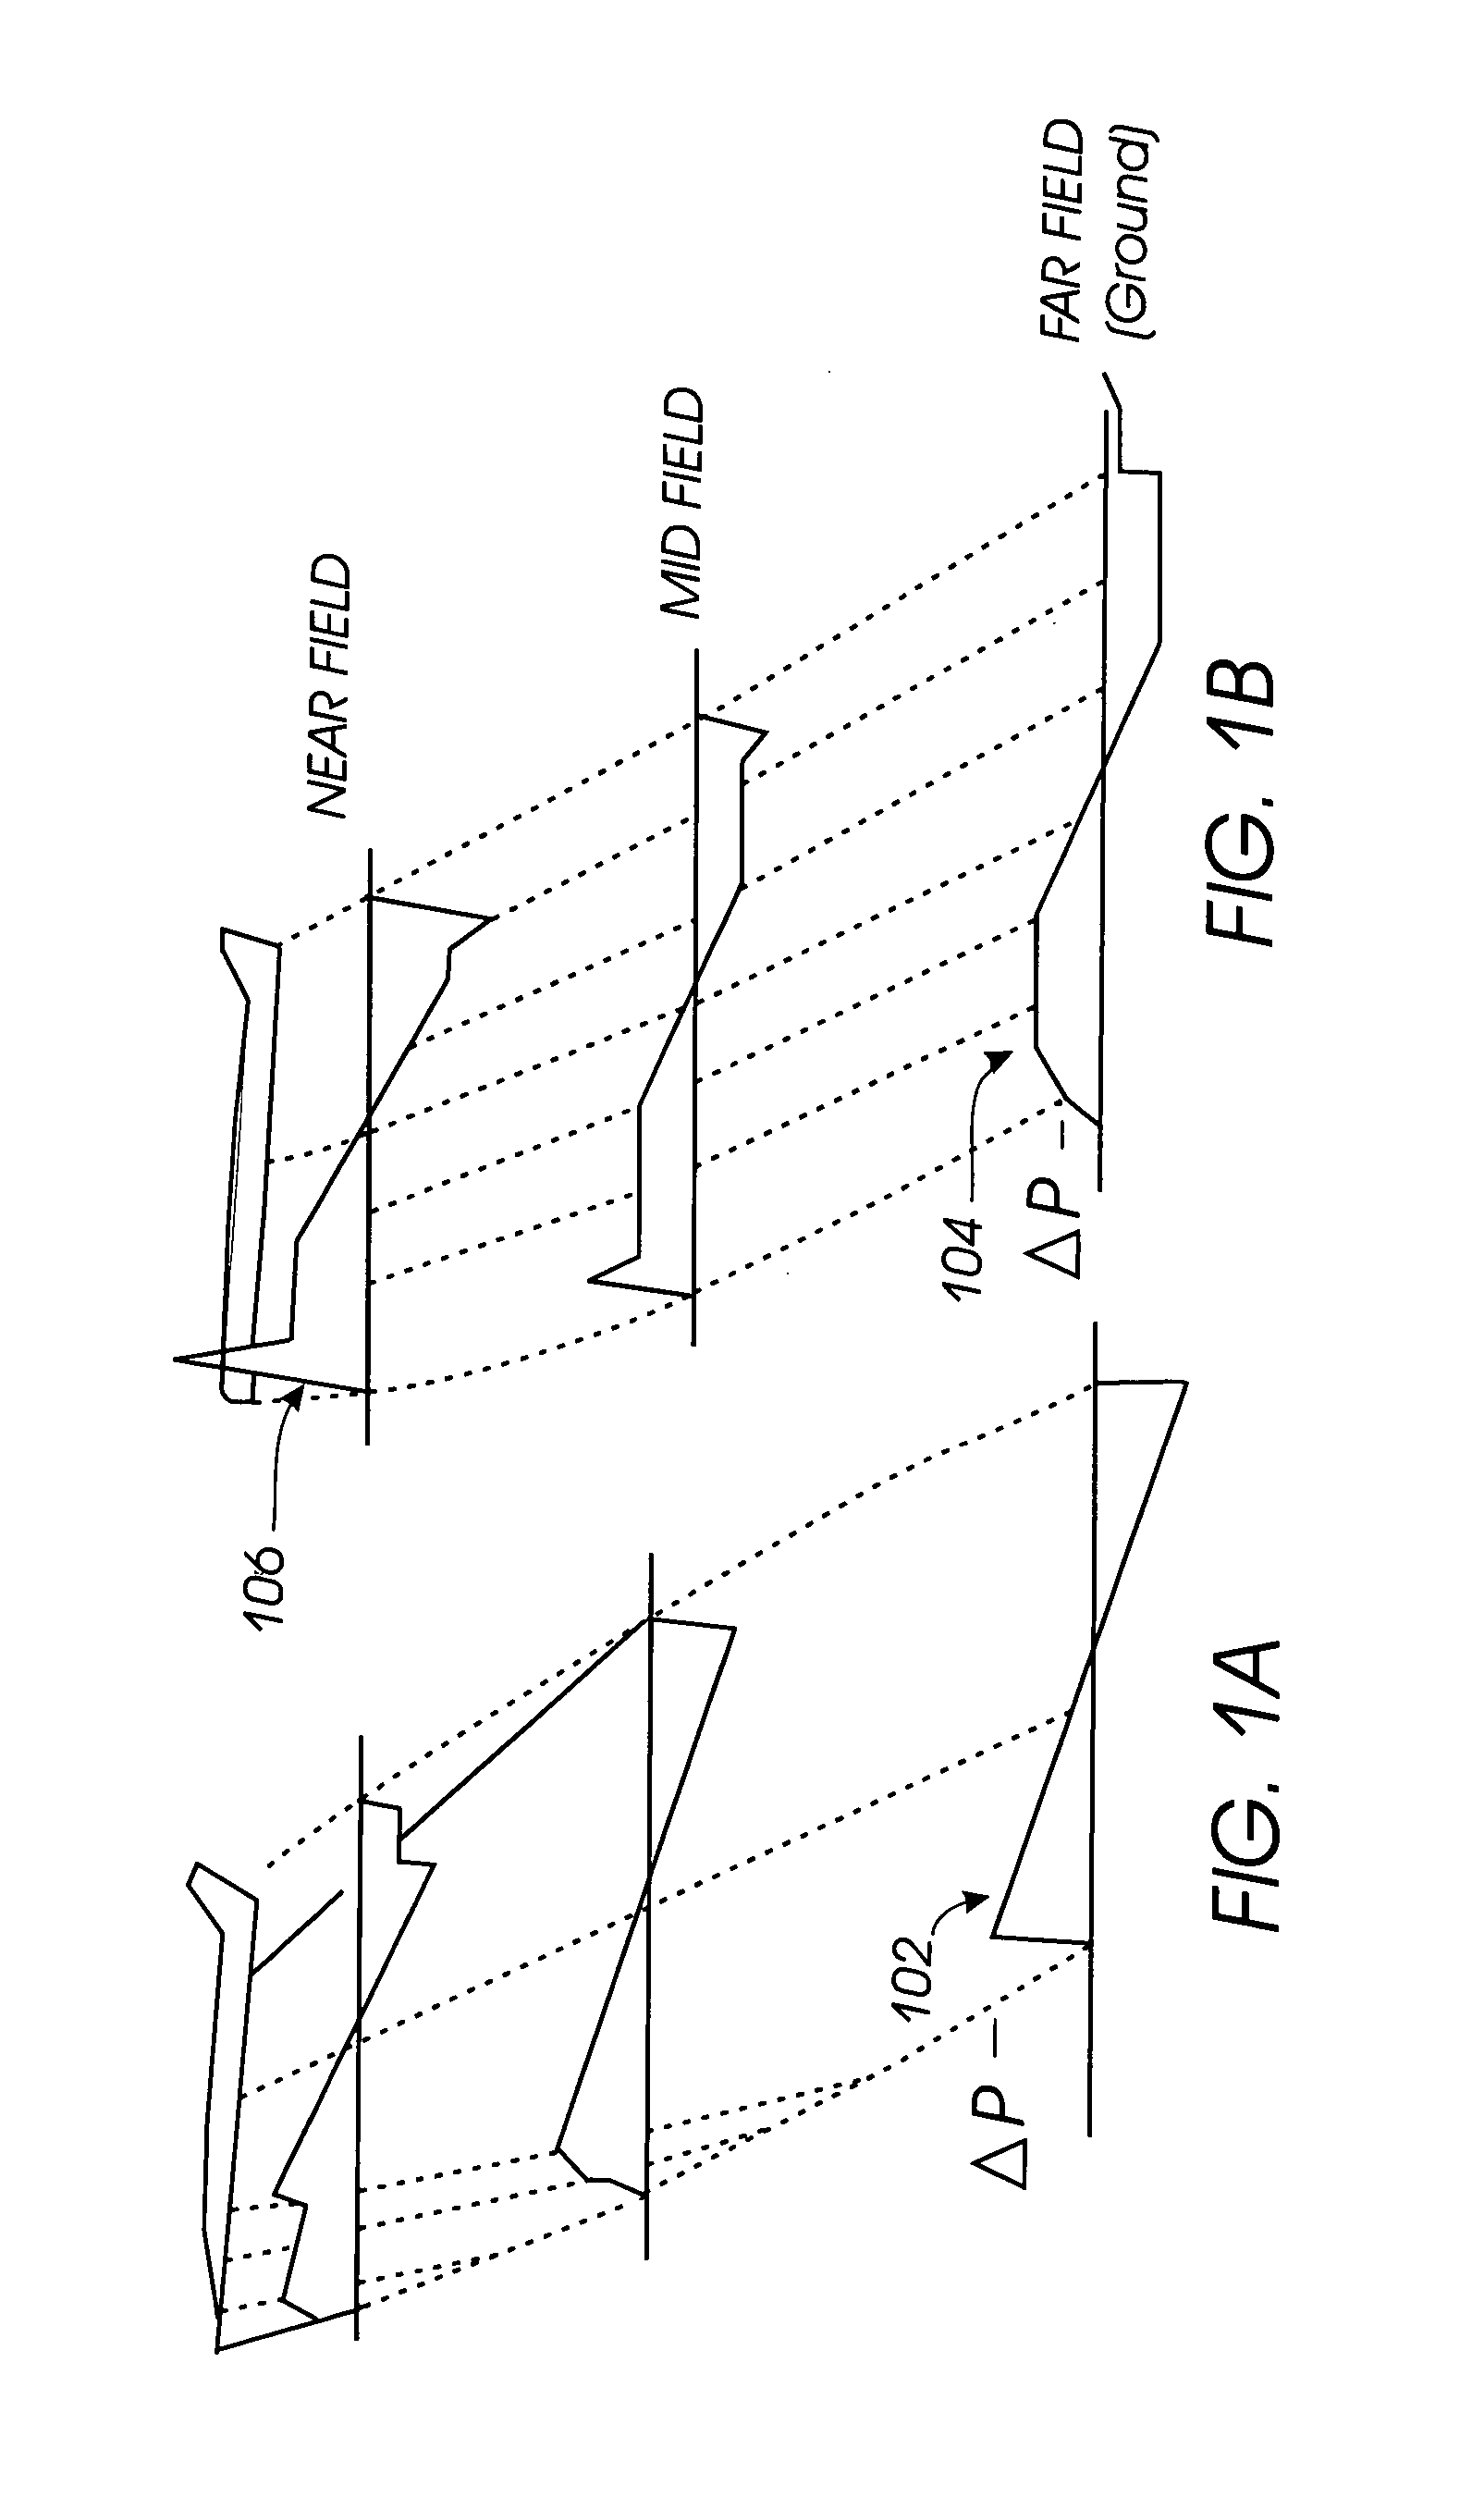 System, apparatus, and method for redistributing forces to meet performance goals and shock wave disturbance constraints